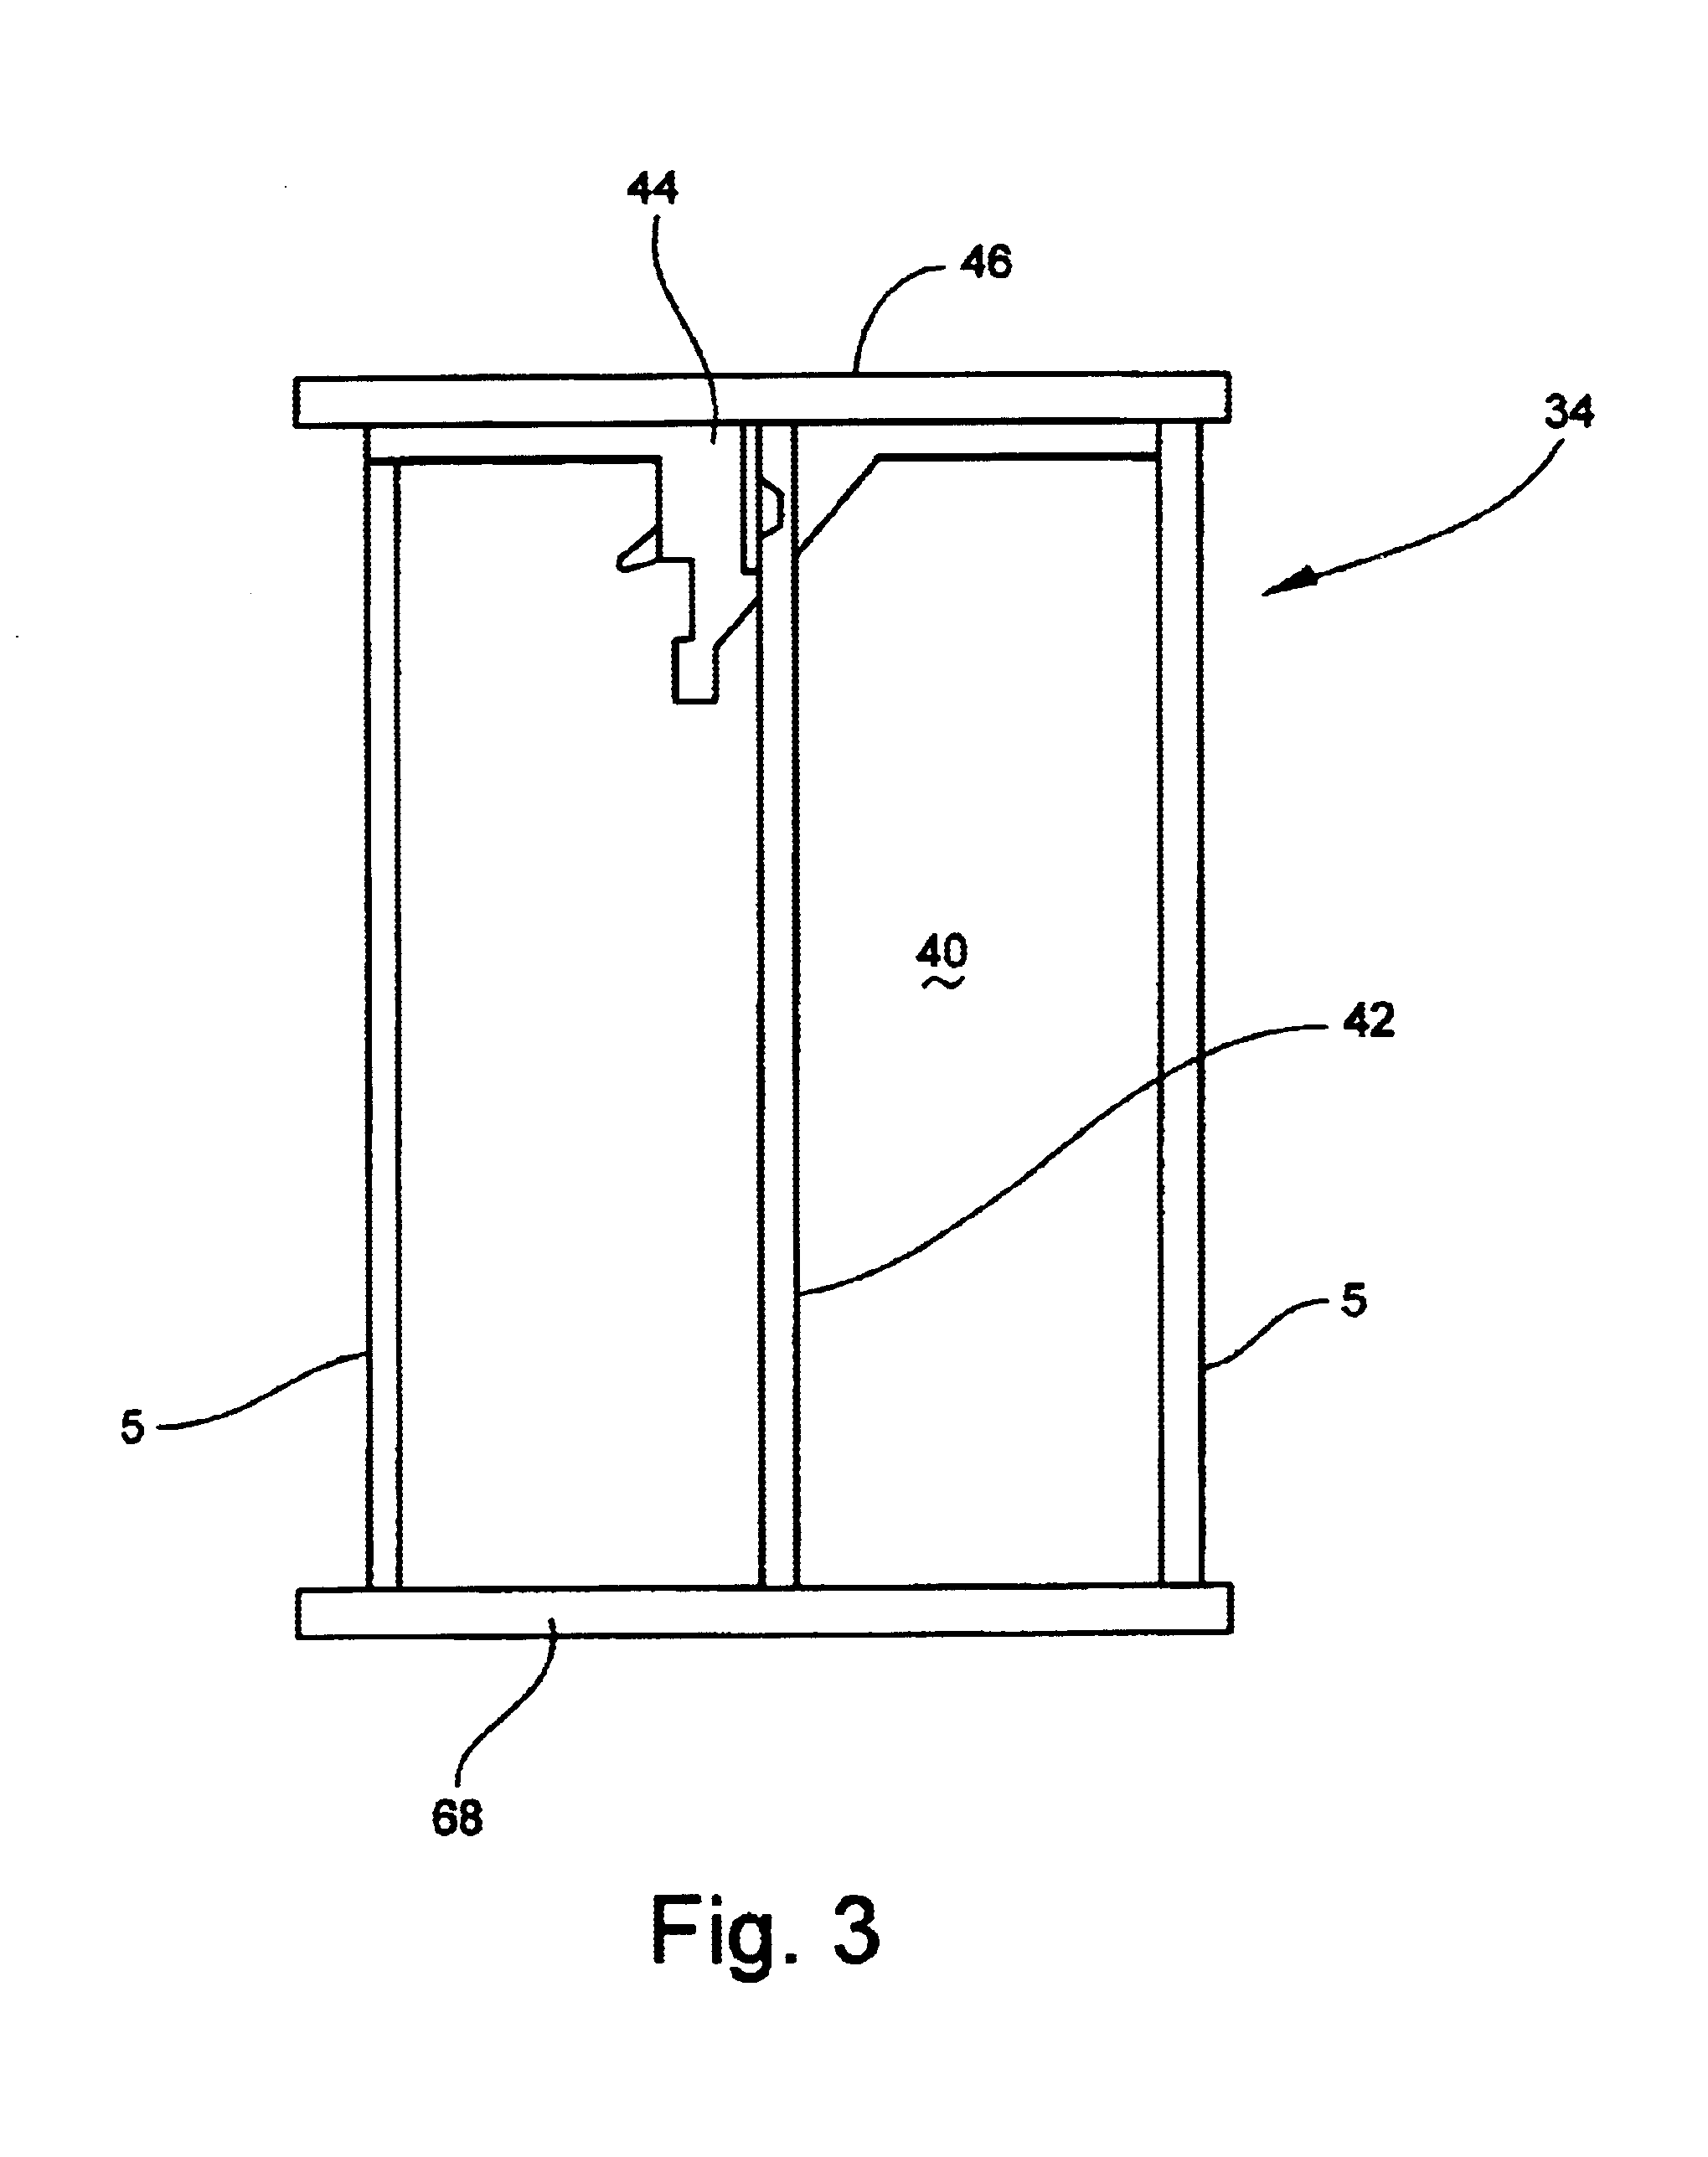 Drawer support and closure apparatus